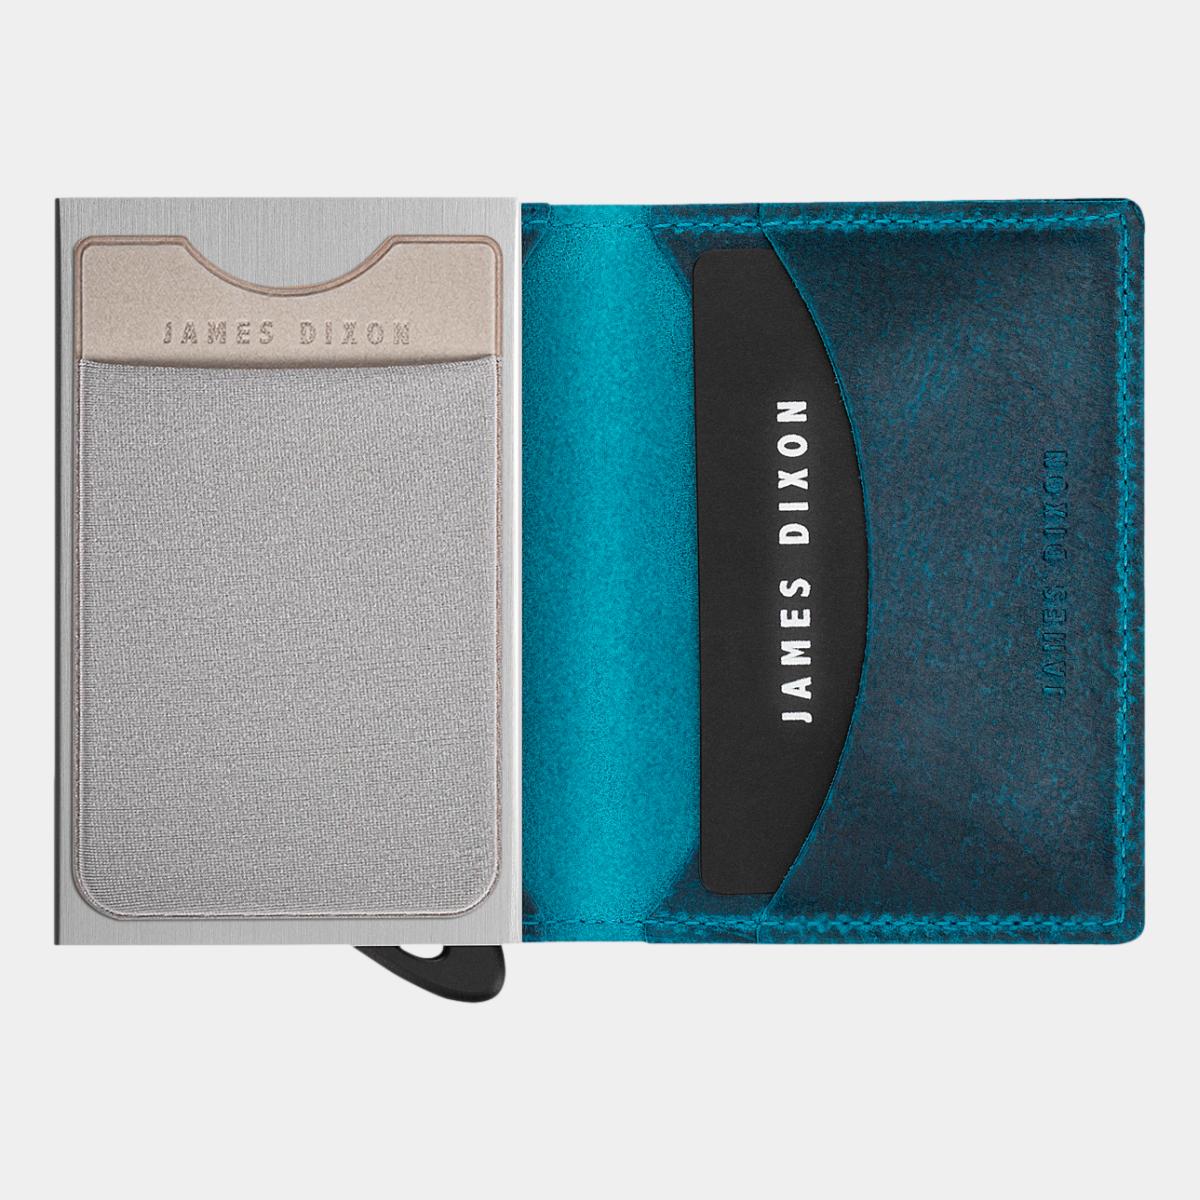 jd0070 james dixon extra cards grey pocket on puro raw wallet open